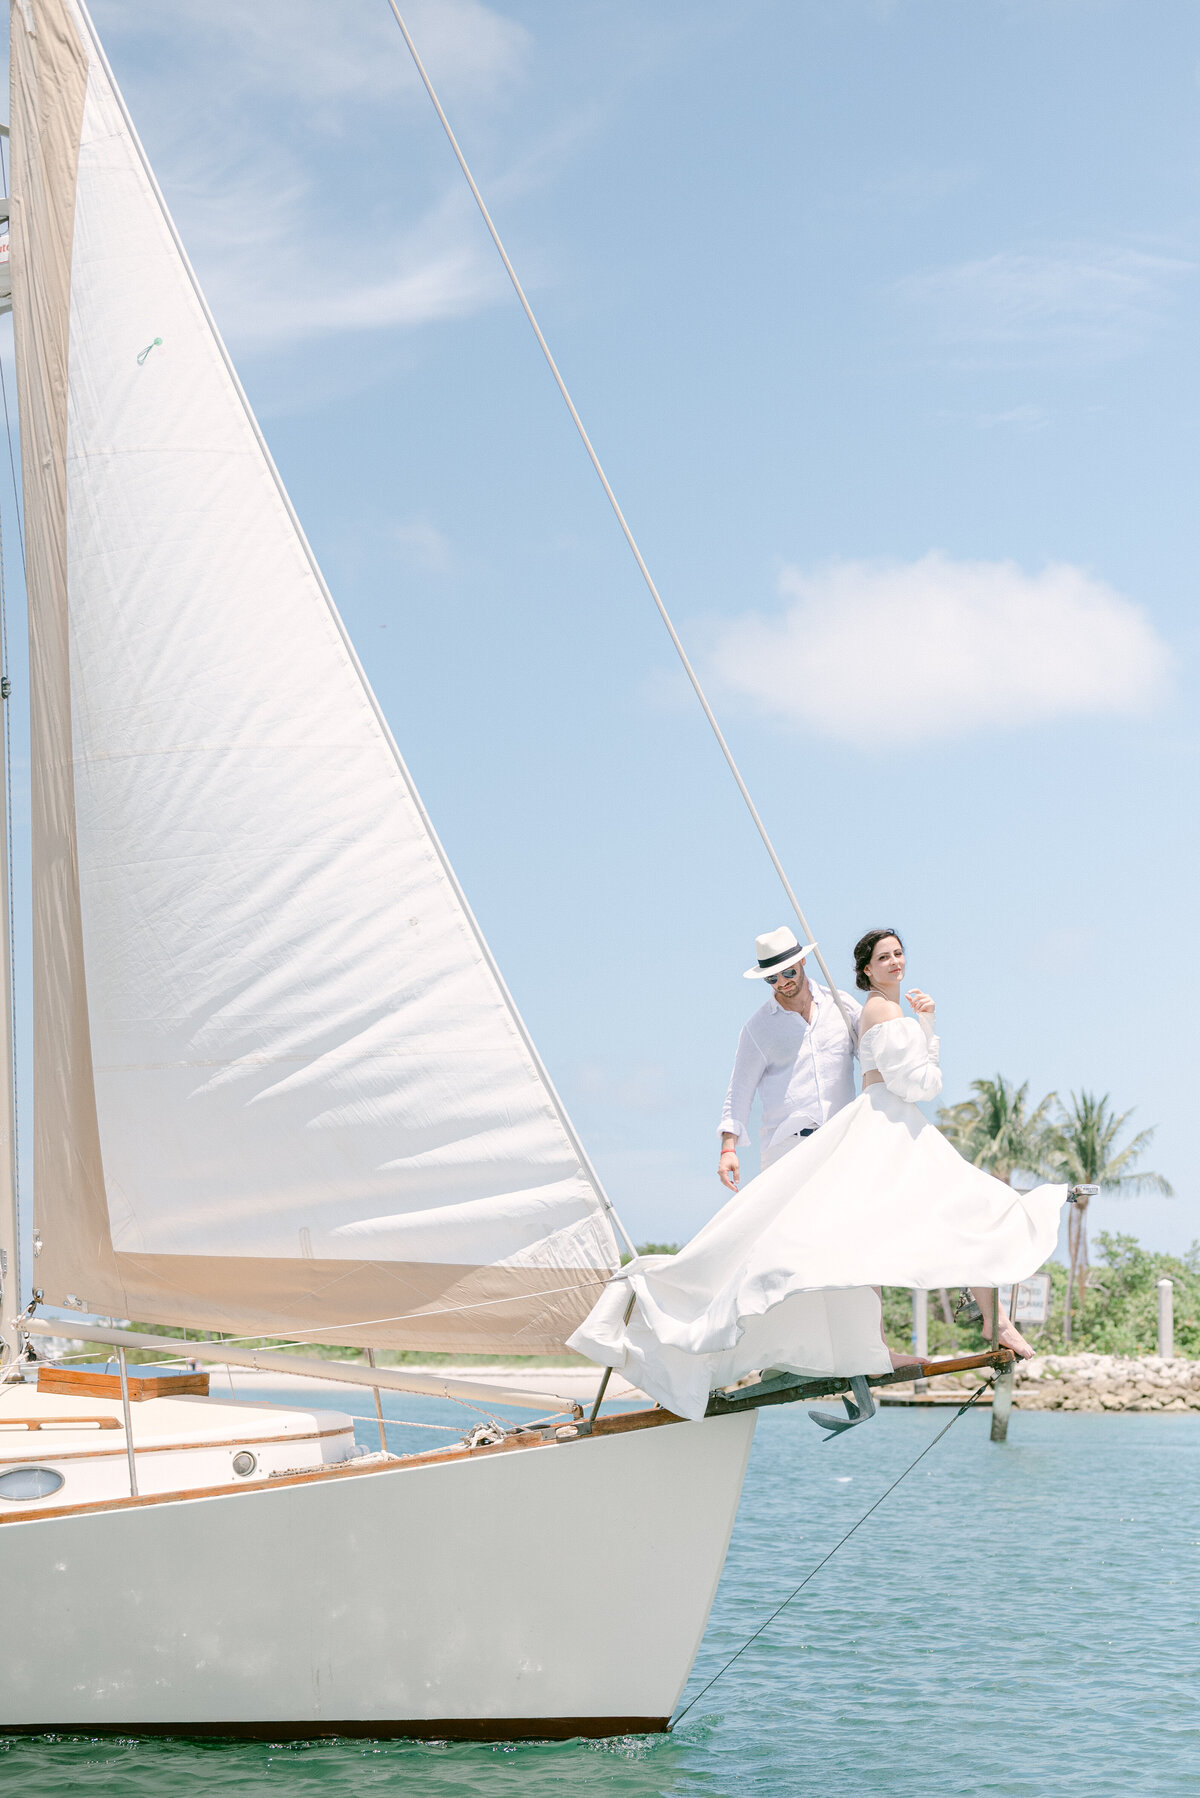 Bride and groom on a sailboat